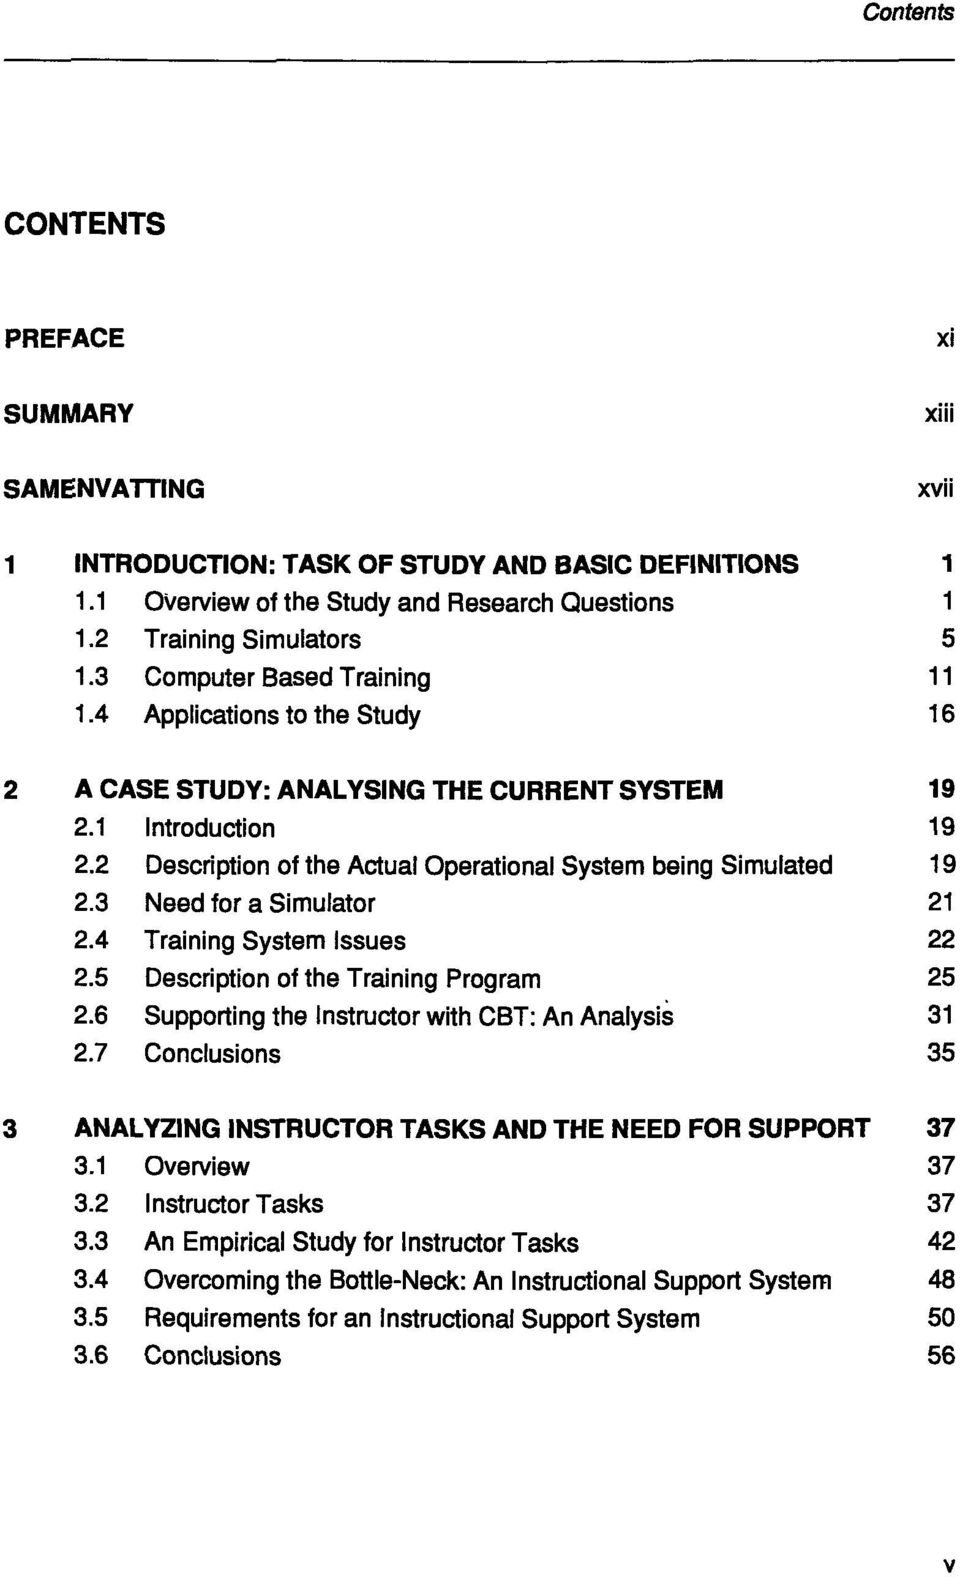 3 Need for a Simulator 21 2.4 Training System Issues 22 2.5 Description of the Training Program 25 2.6 Supporting the Instructor with CBT: An Analysis 31 2.